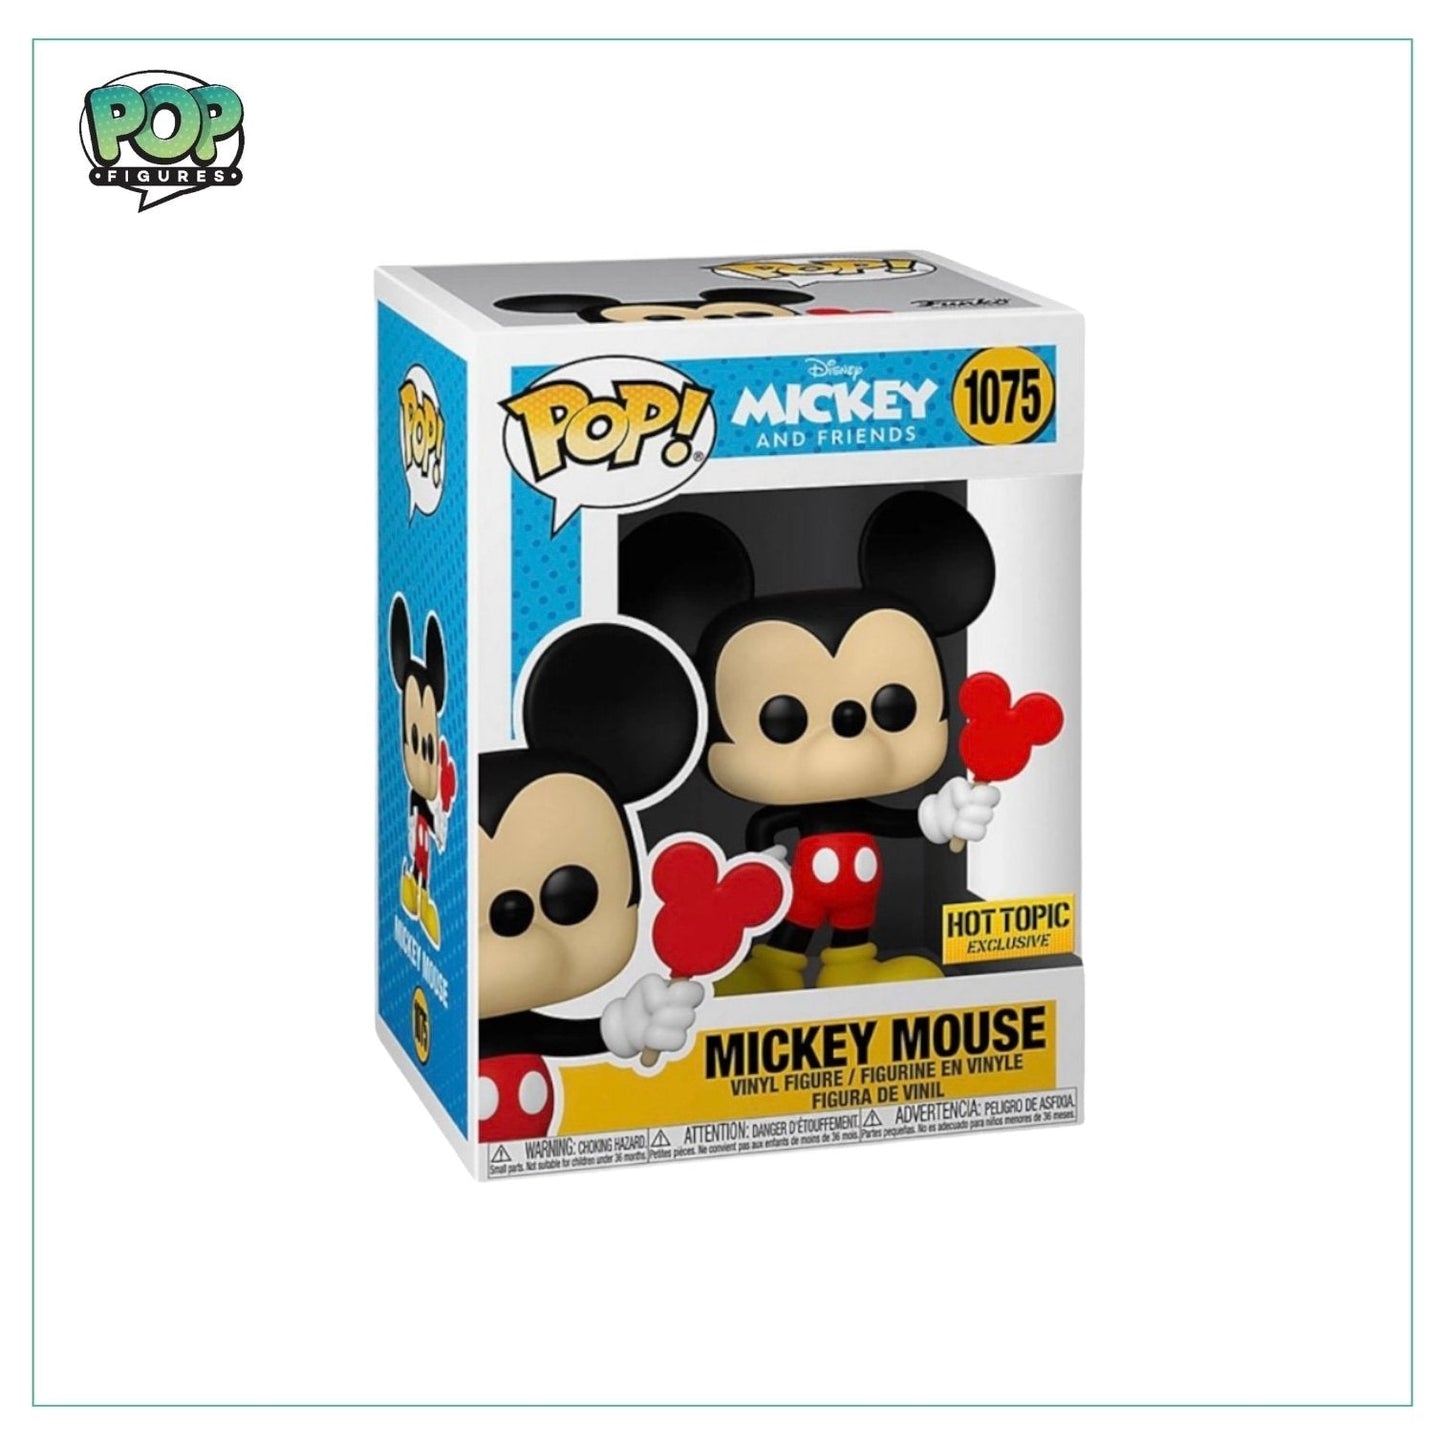 Mickey Mouse #1075 Funko Pop! Mickey and Friends, Hot Topic Exclusive - Angry Cat